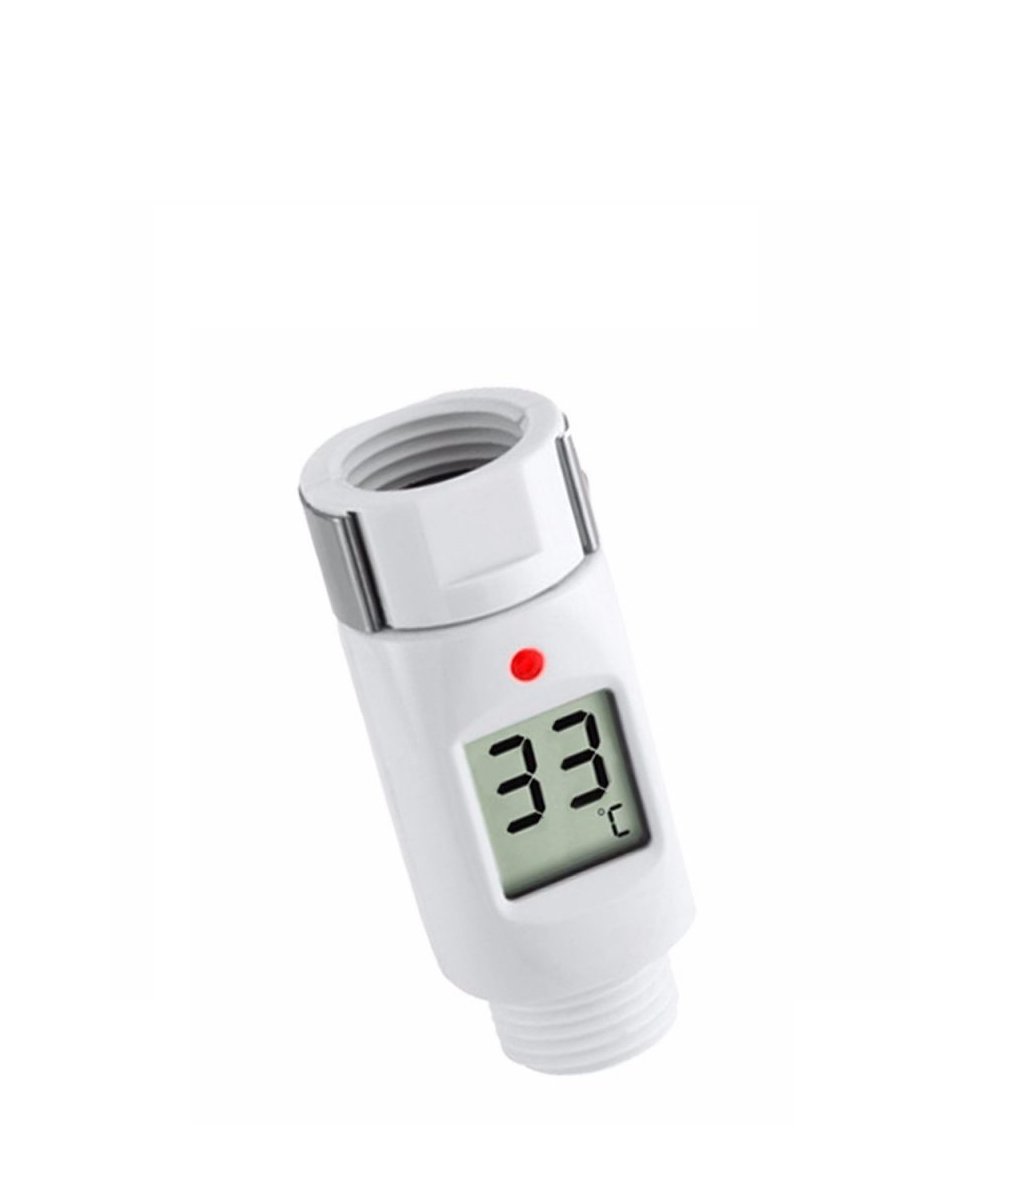 https://luxenmart.com/wp-content/uploads/2018/04/Auto-Power-Off-Waterproof-Digital-Shower-Thermometer-Accurate-Meter-measuring-water-temperature-meter-tester-e1525953838819-1.jpg